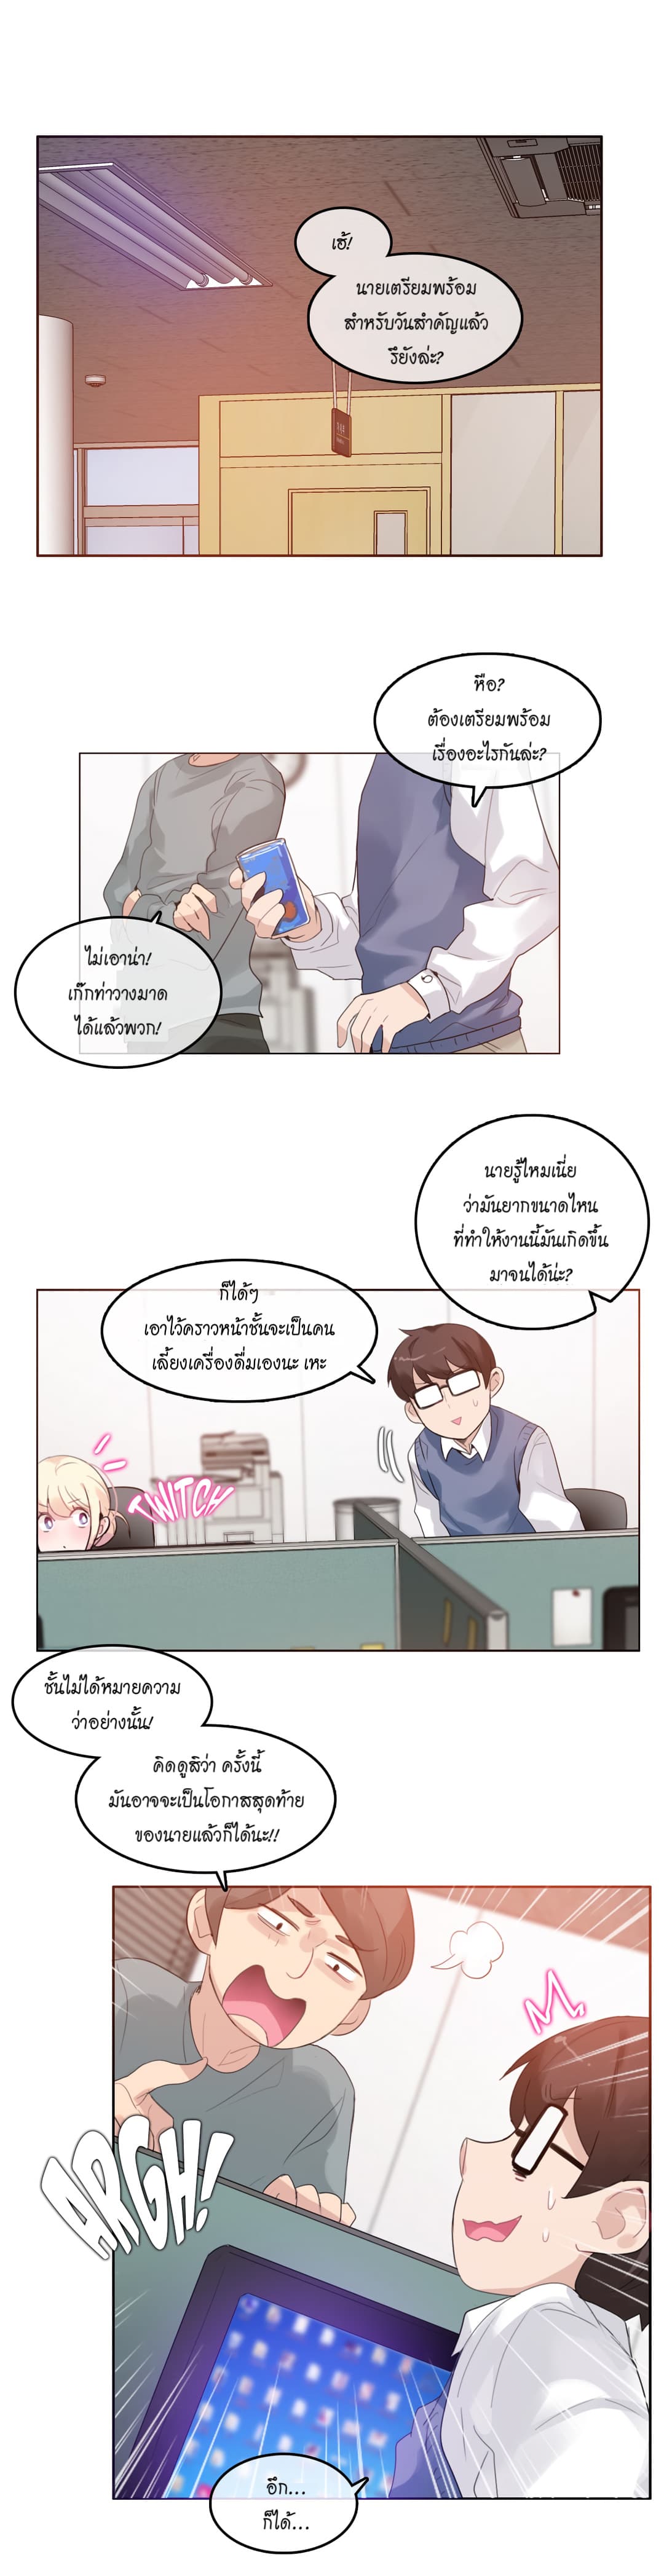 A Pervert’s Daily Life 27 (1)